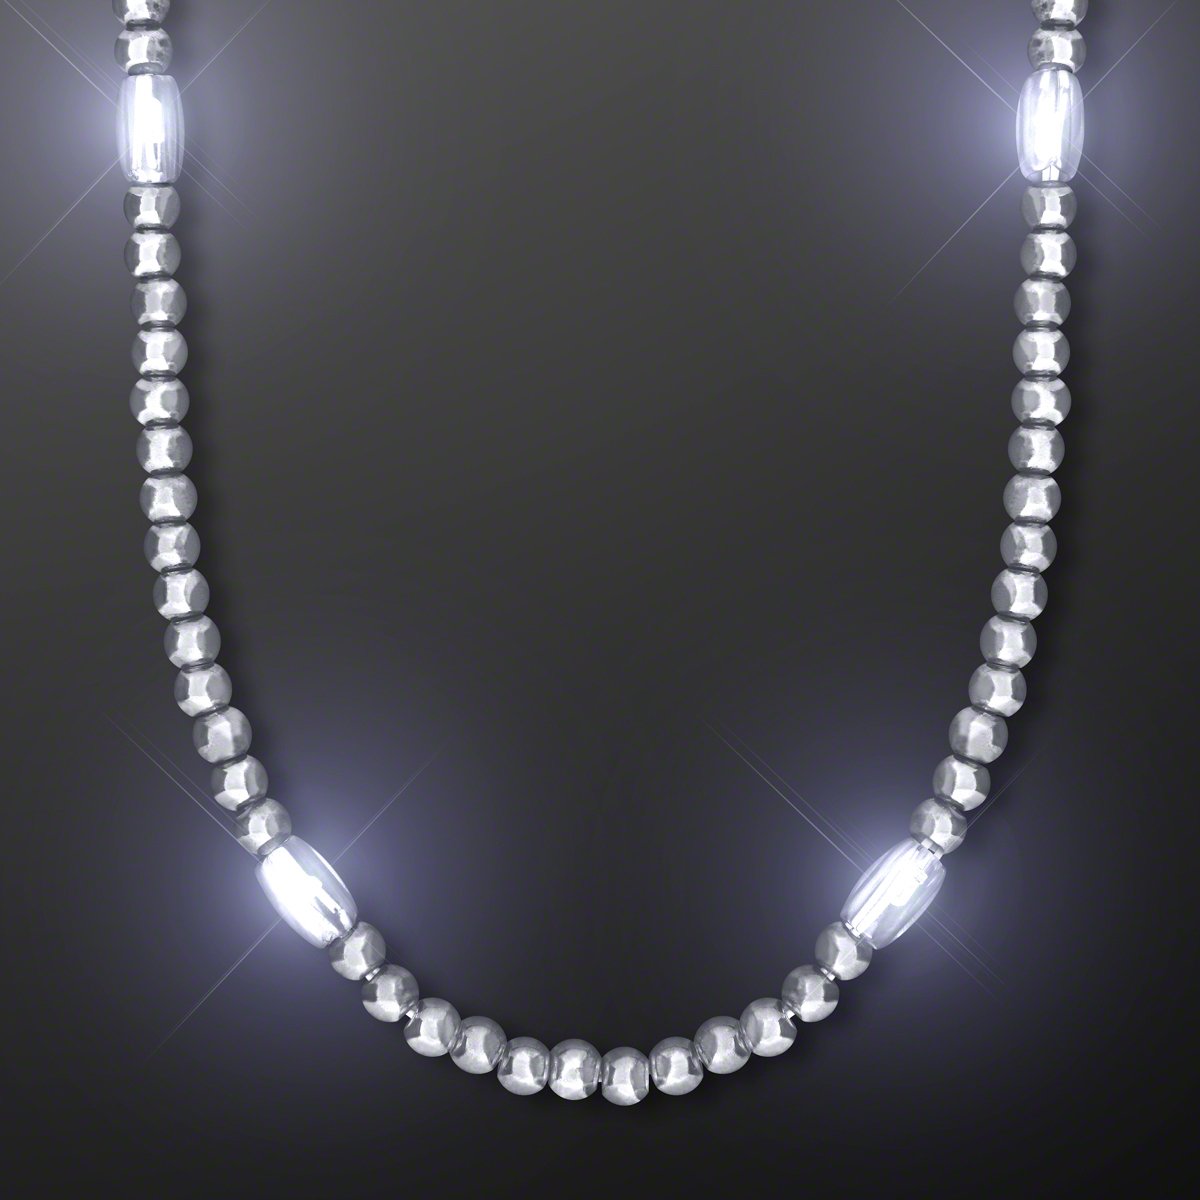 Silver LED Light Up Bead Necklace